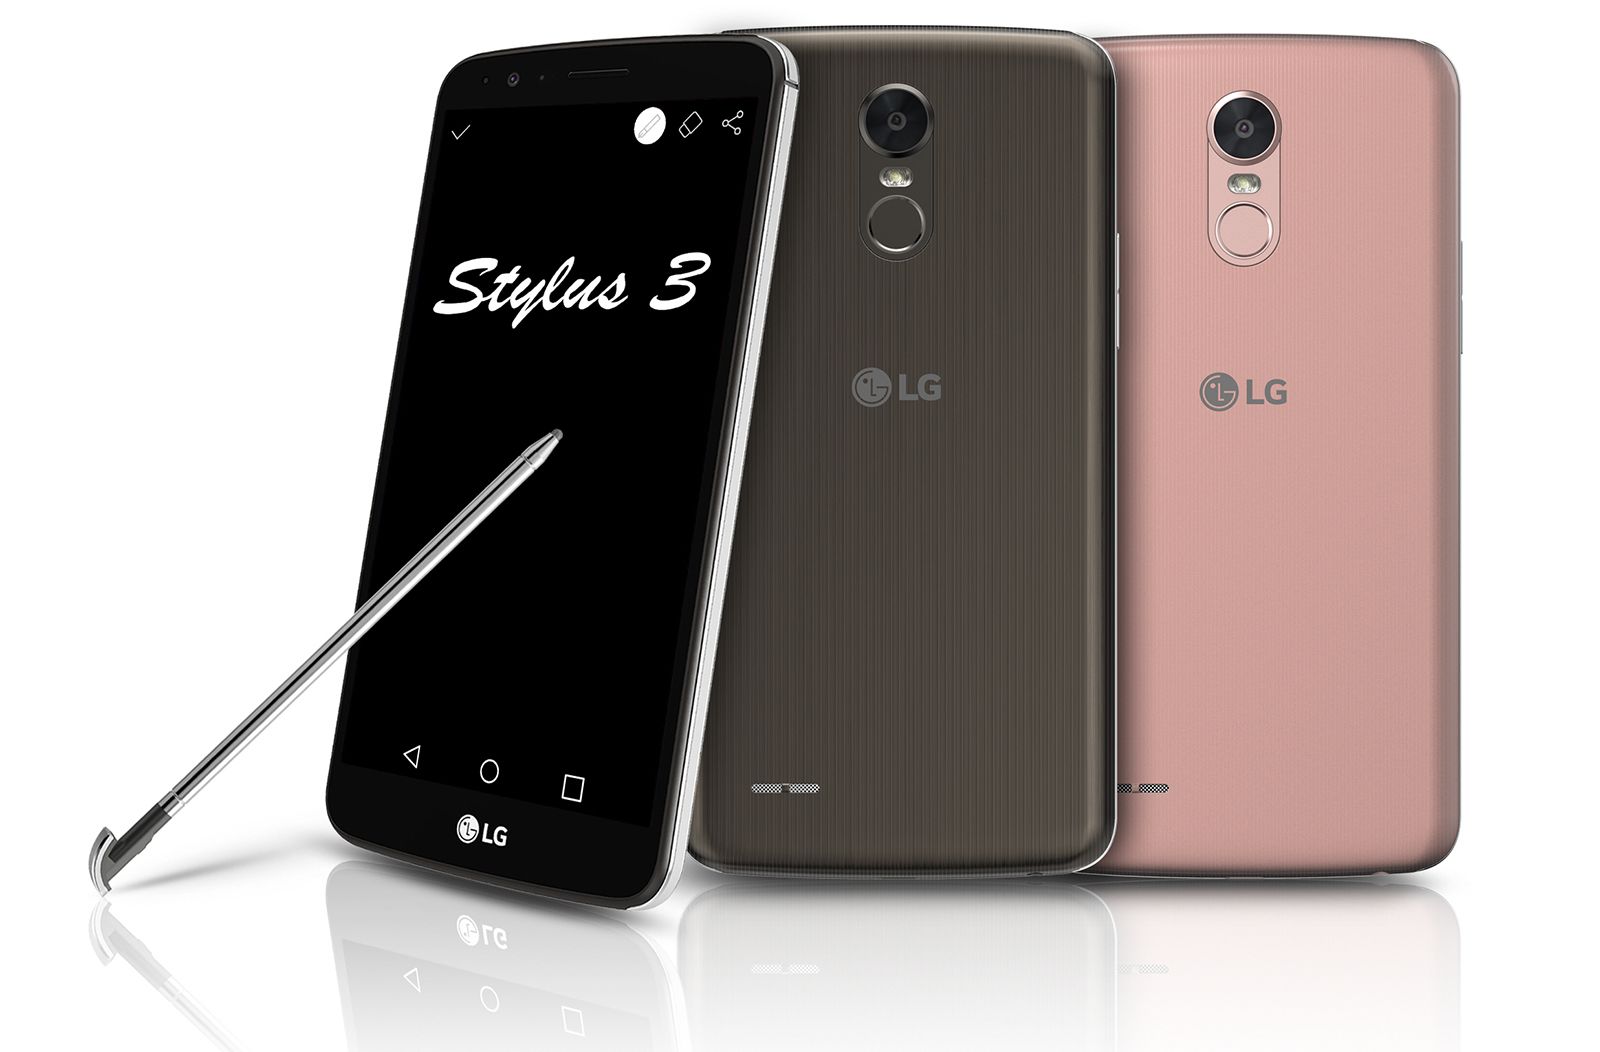 lg confirms ces 2017 smartphone line up k series and stylus 3 inbound image 2